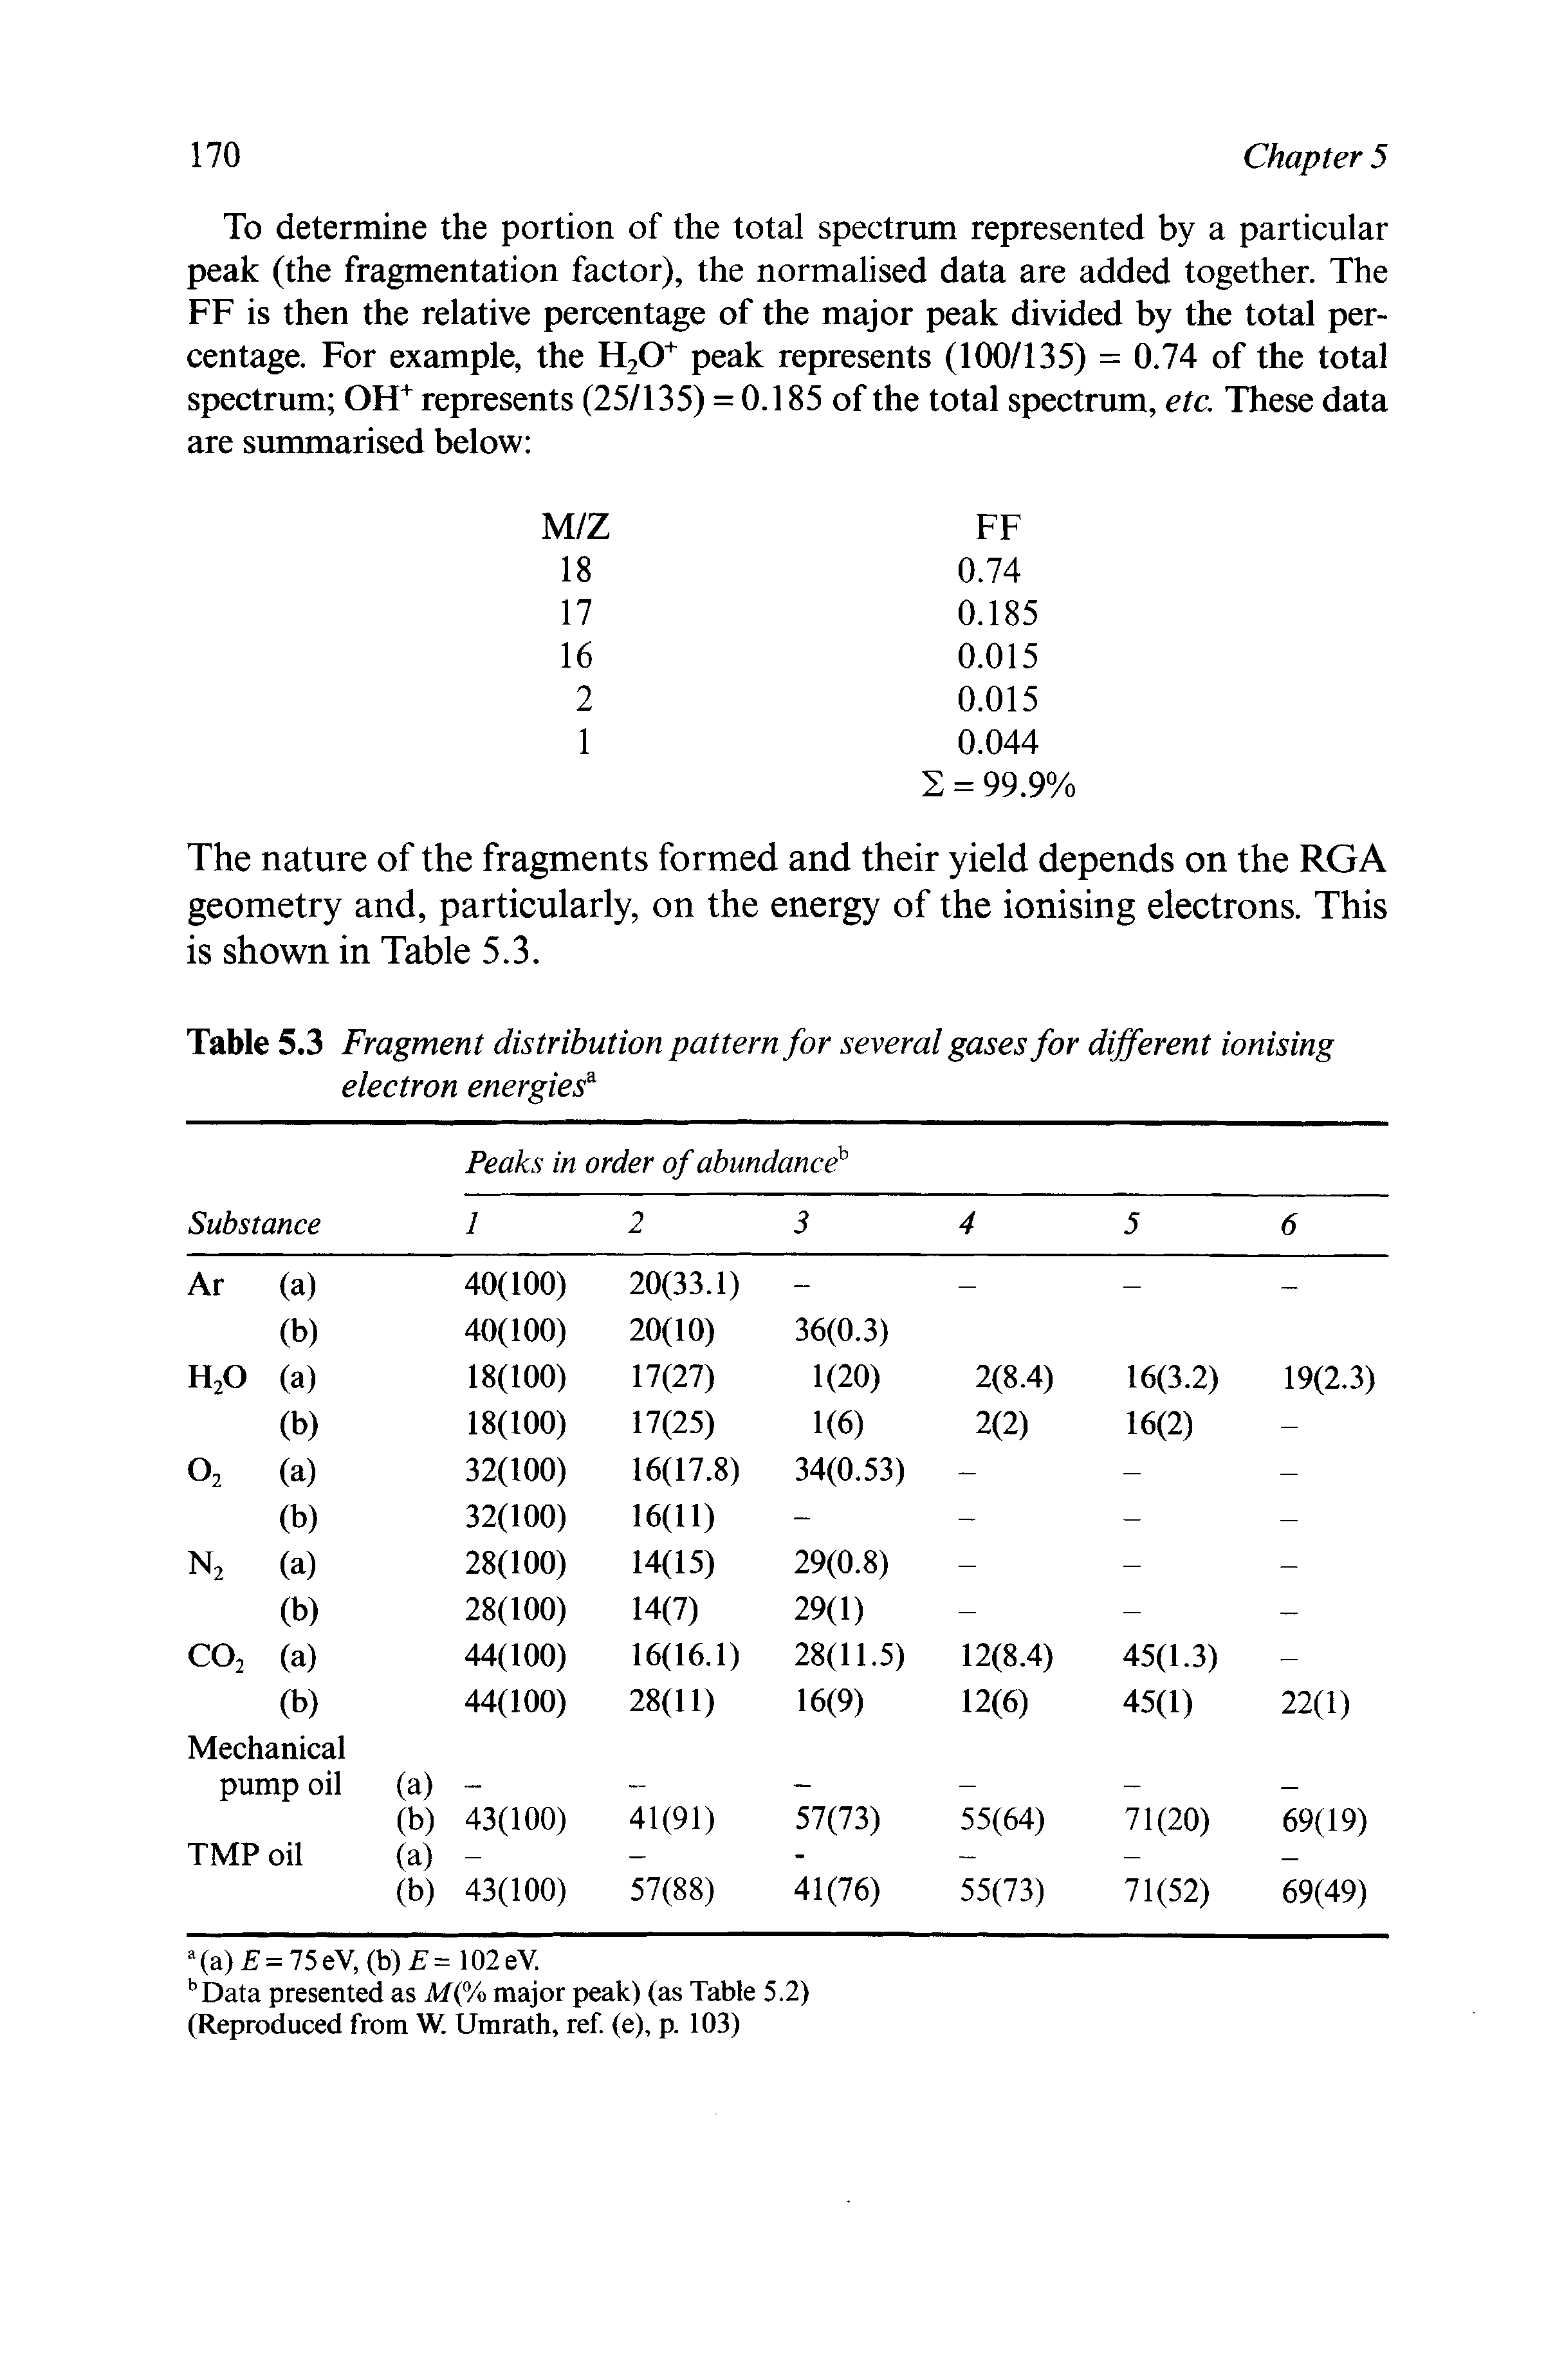 Table 5.3 Fragment distribution pattern for several gases for different ionising electron energiesa...